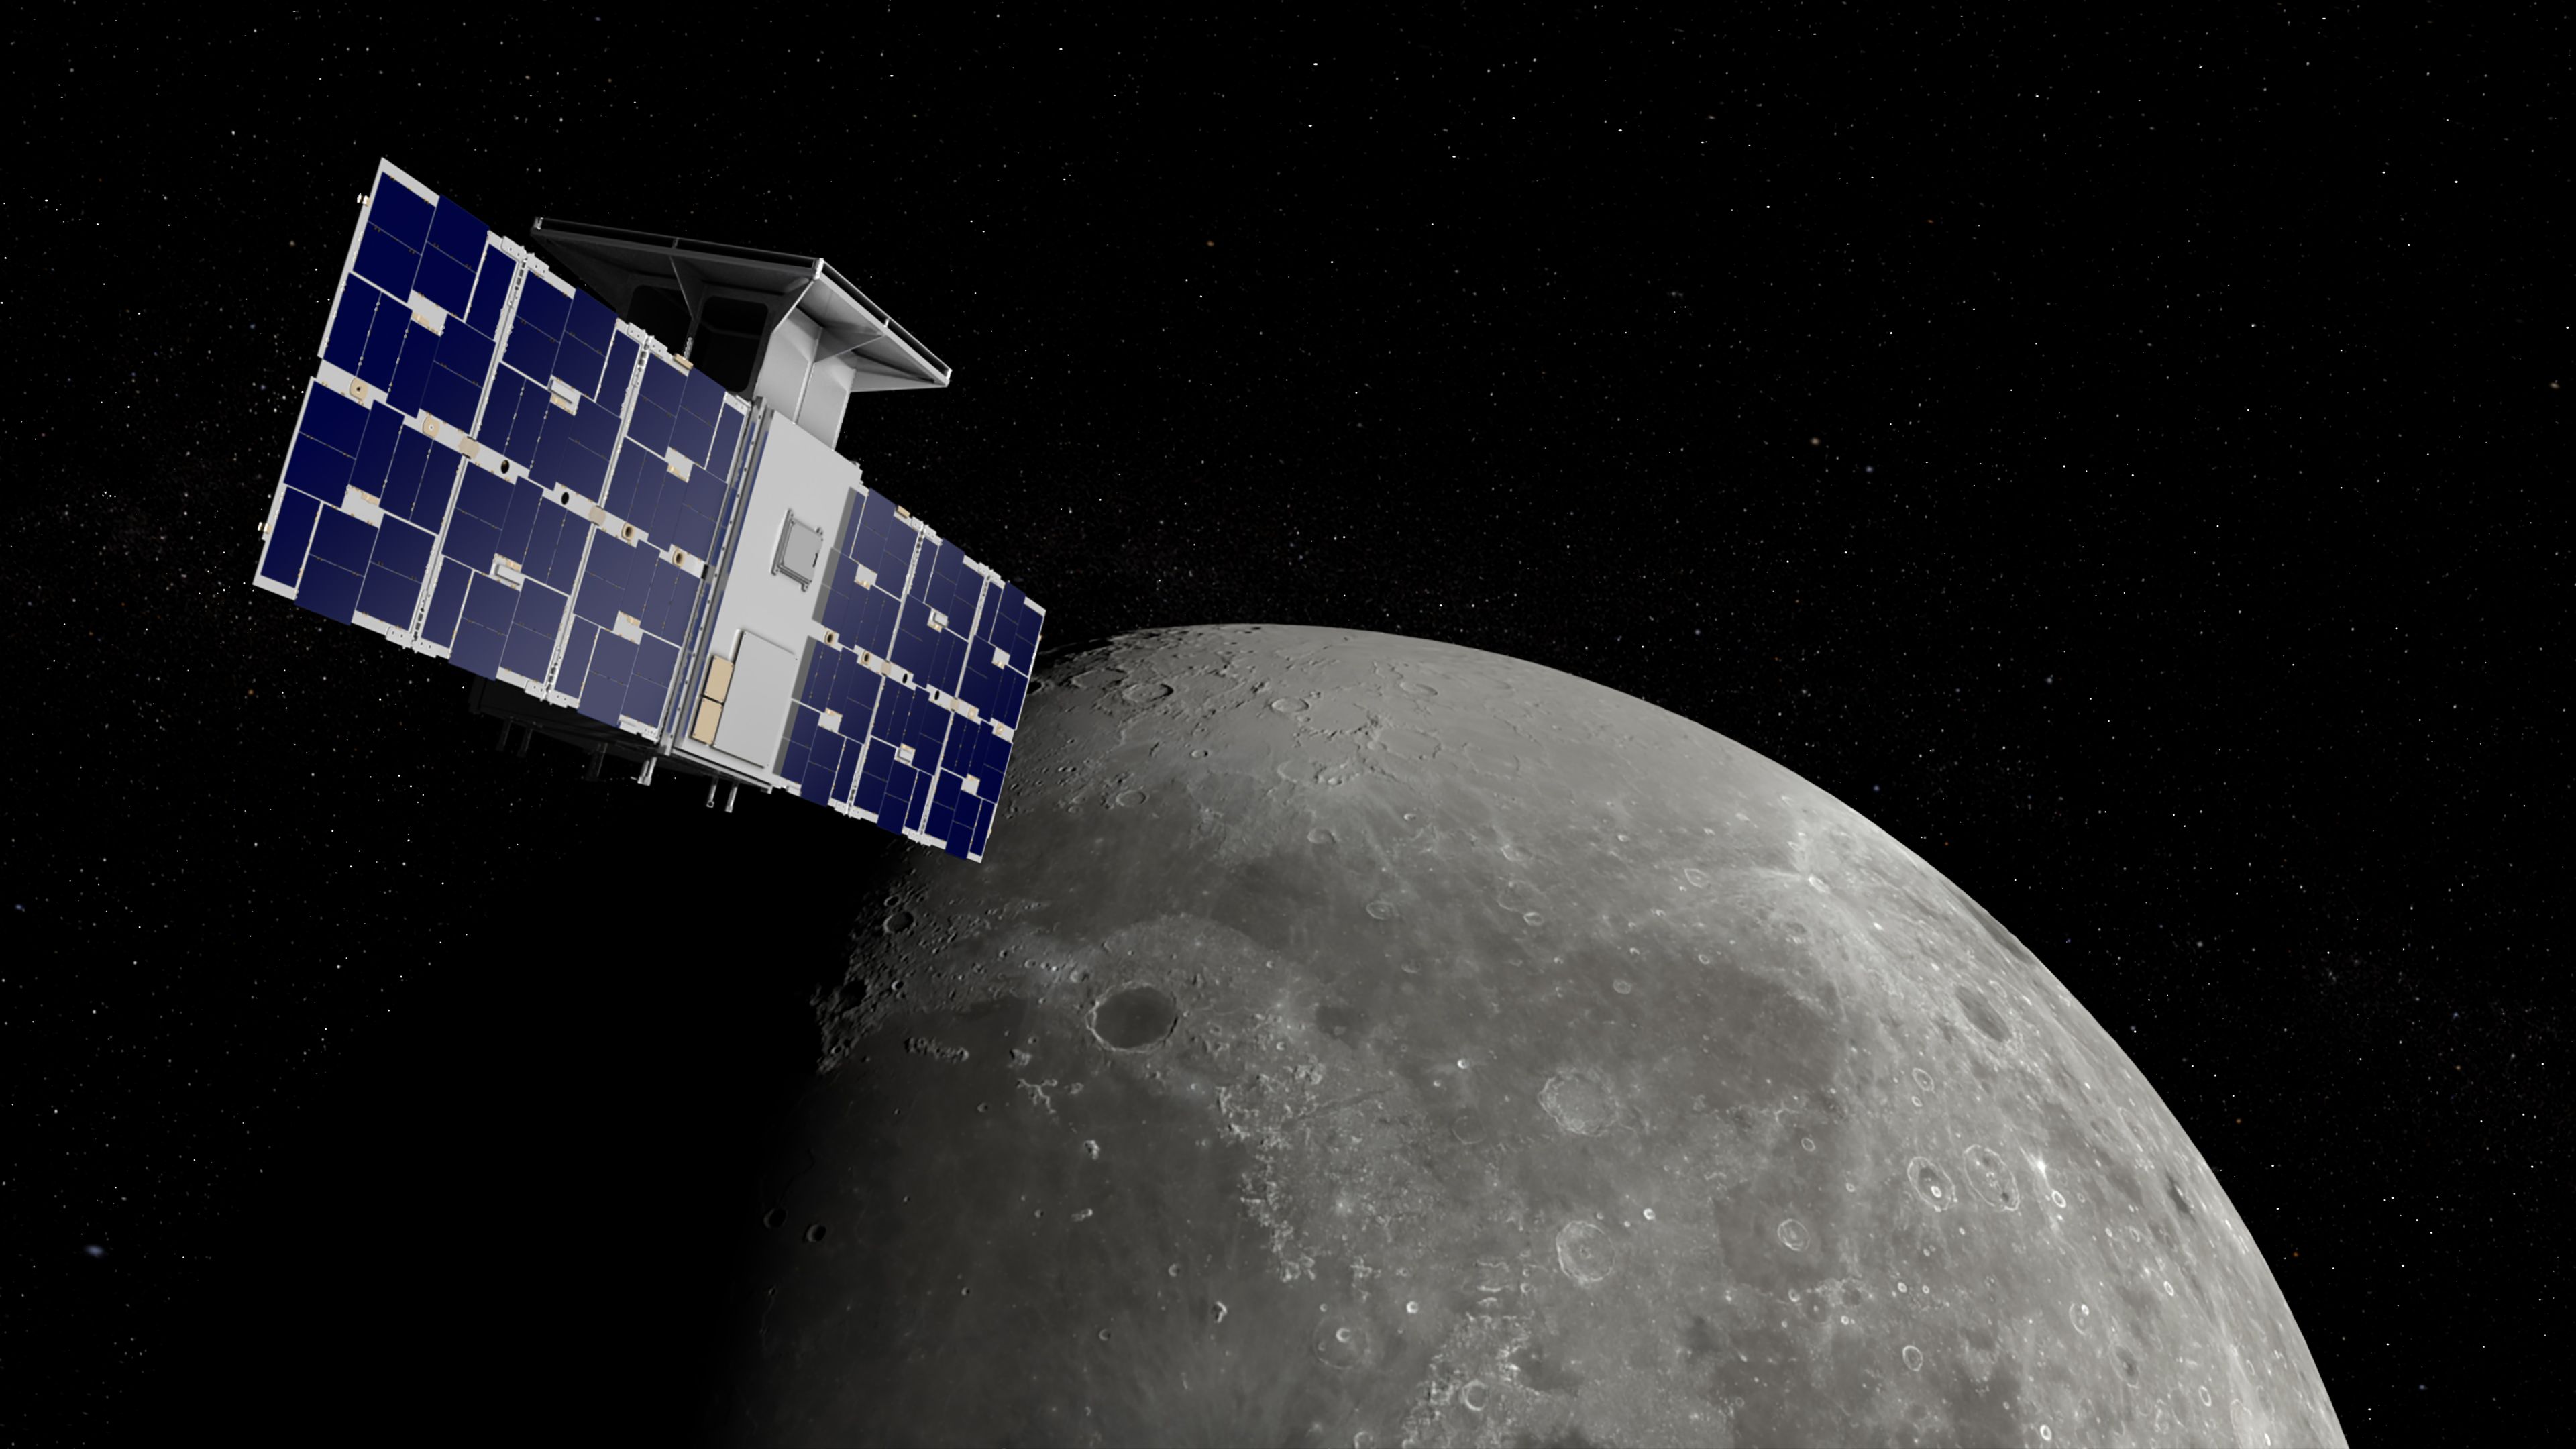 The NASA-funded initiate of CAPSTONE, a diminutive cubesat for the moon, delayed to June 6 thumbnail